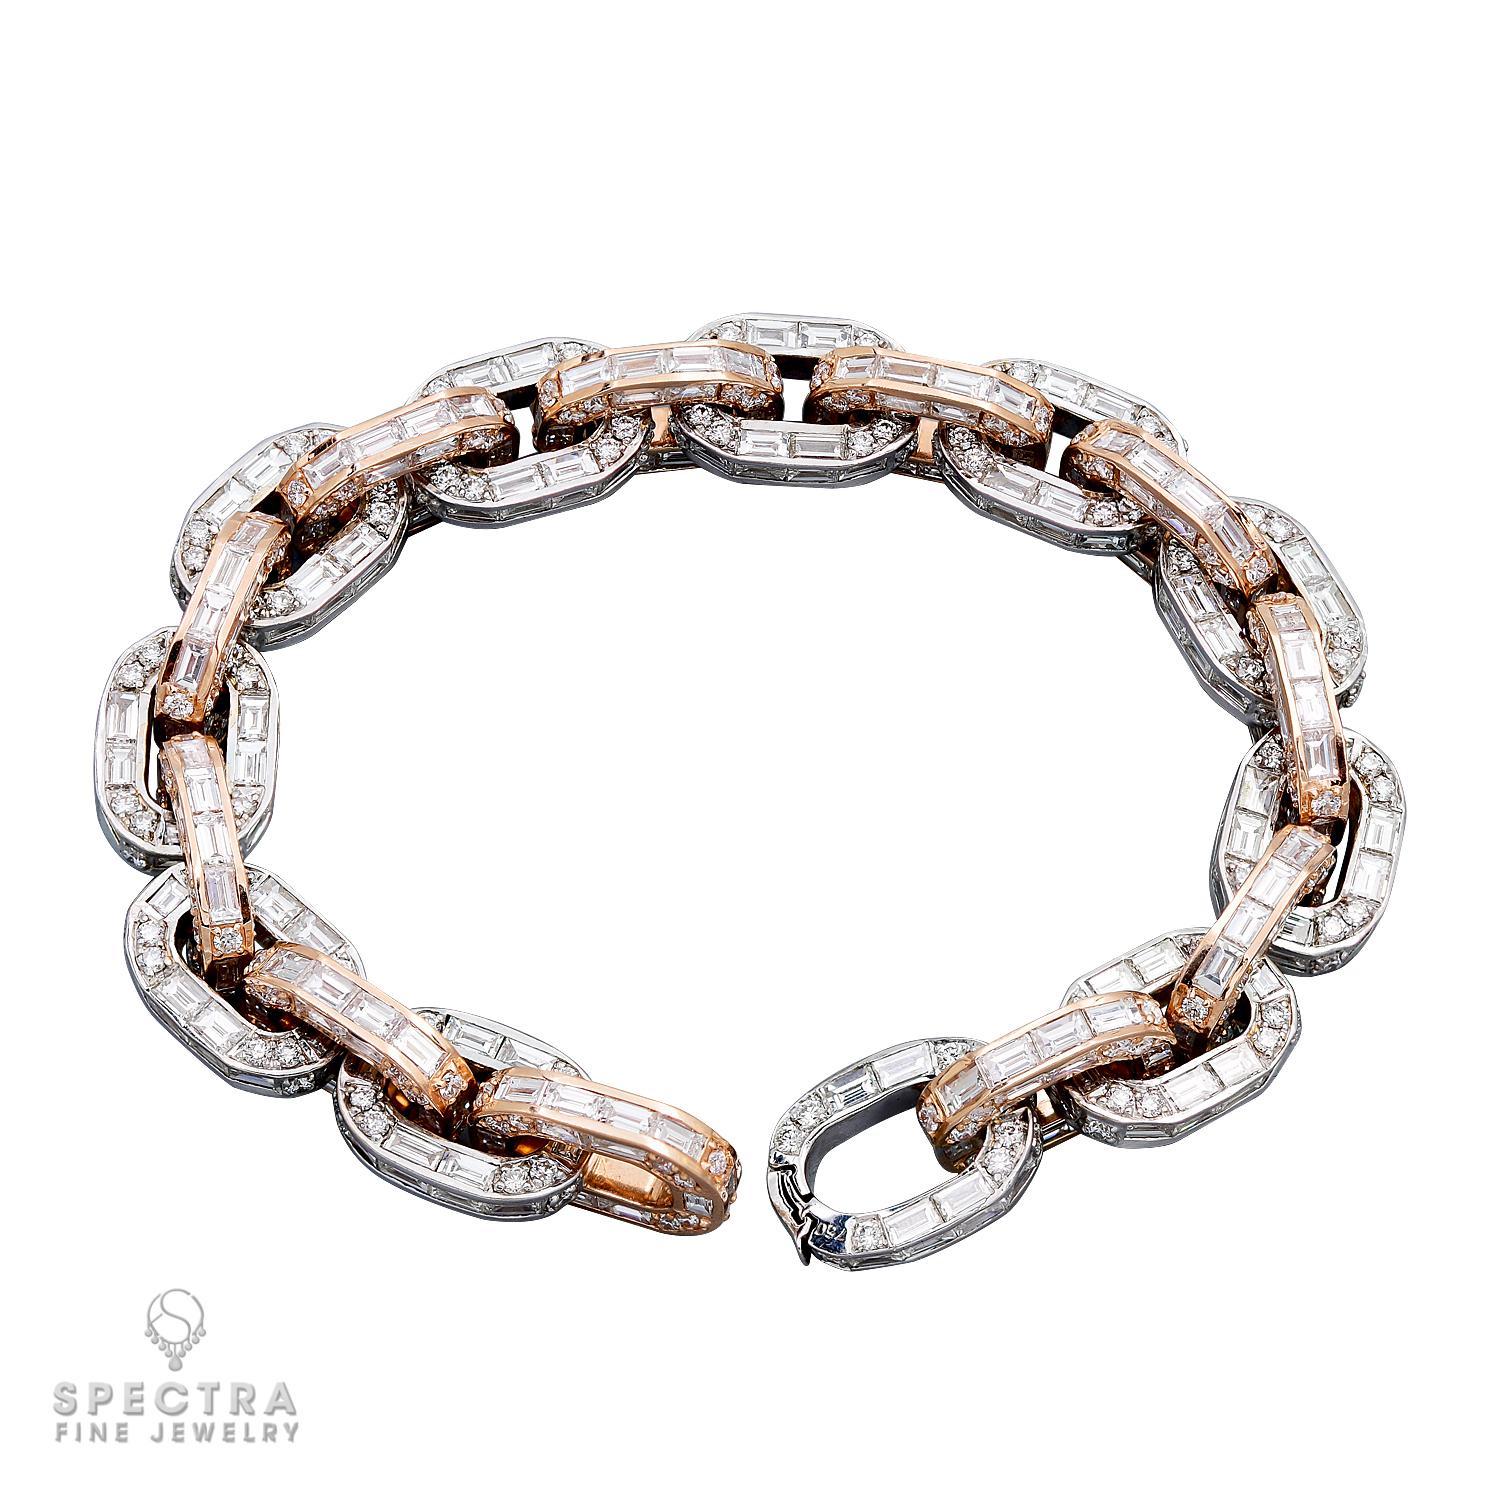 Experience the epitome of minimalistic luxury fused with dazzling diamonds, repeating motifs, and balanced geometric shapes in the Contemporary Diamond 18k Gold Link Bracelet by Spectra Fine Jewelry. Crafted in the 21st century, this bracelet